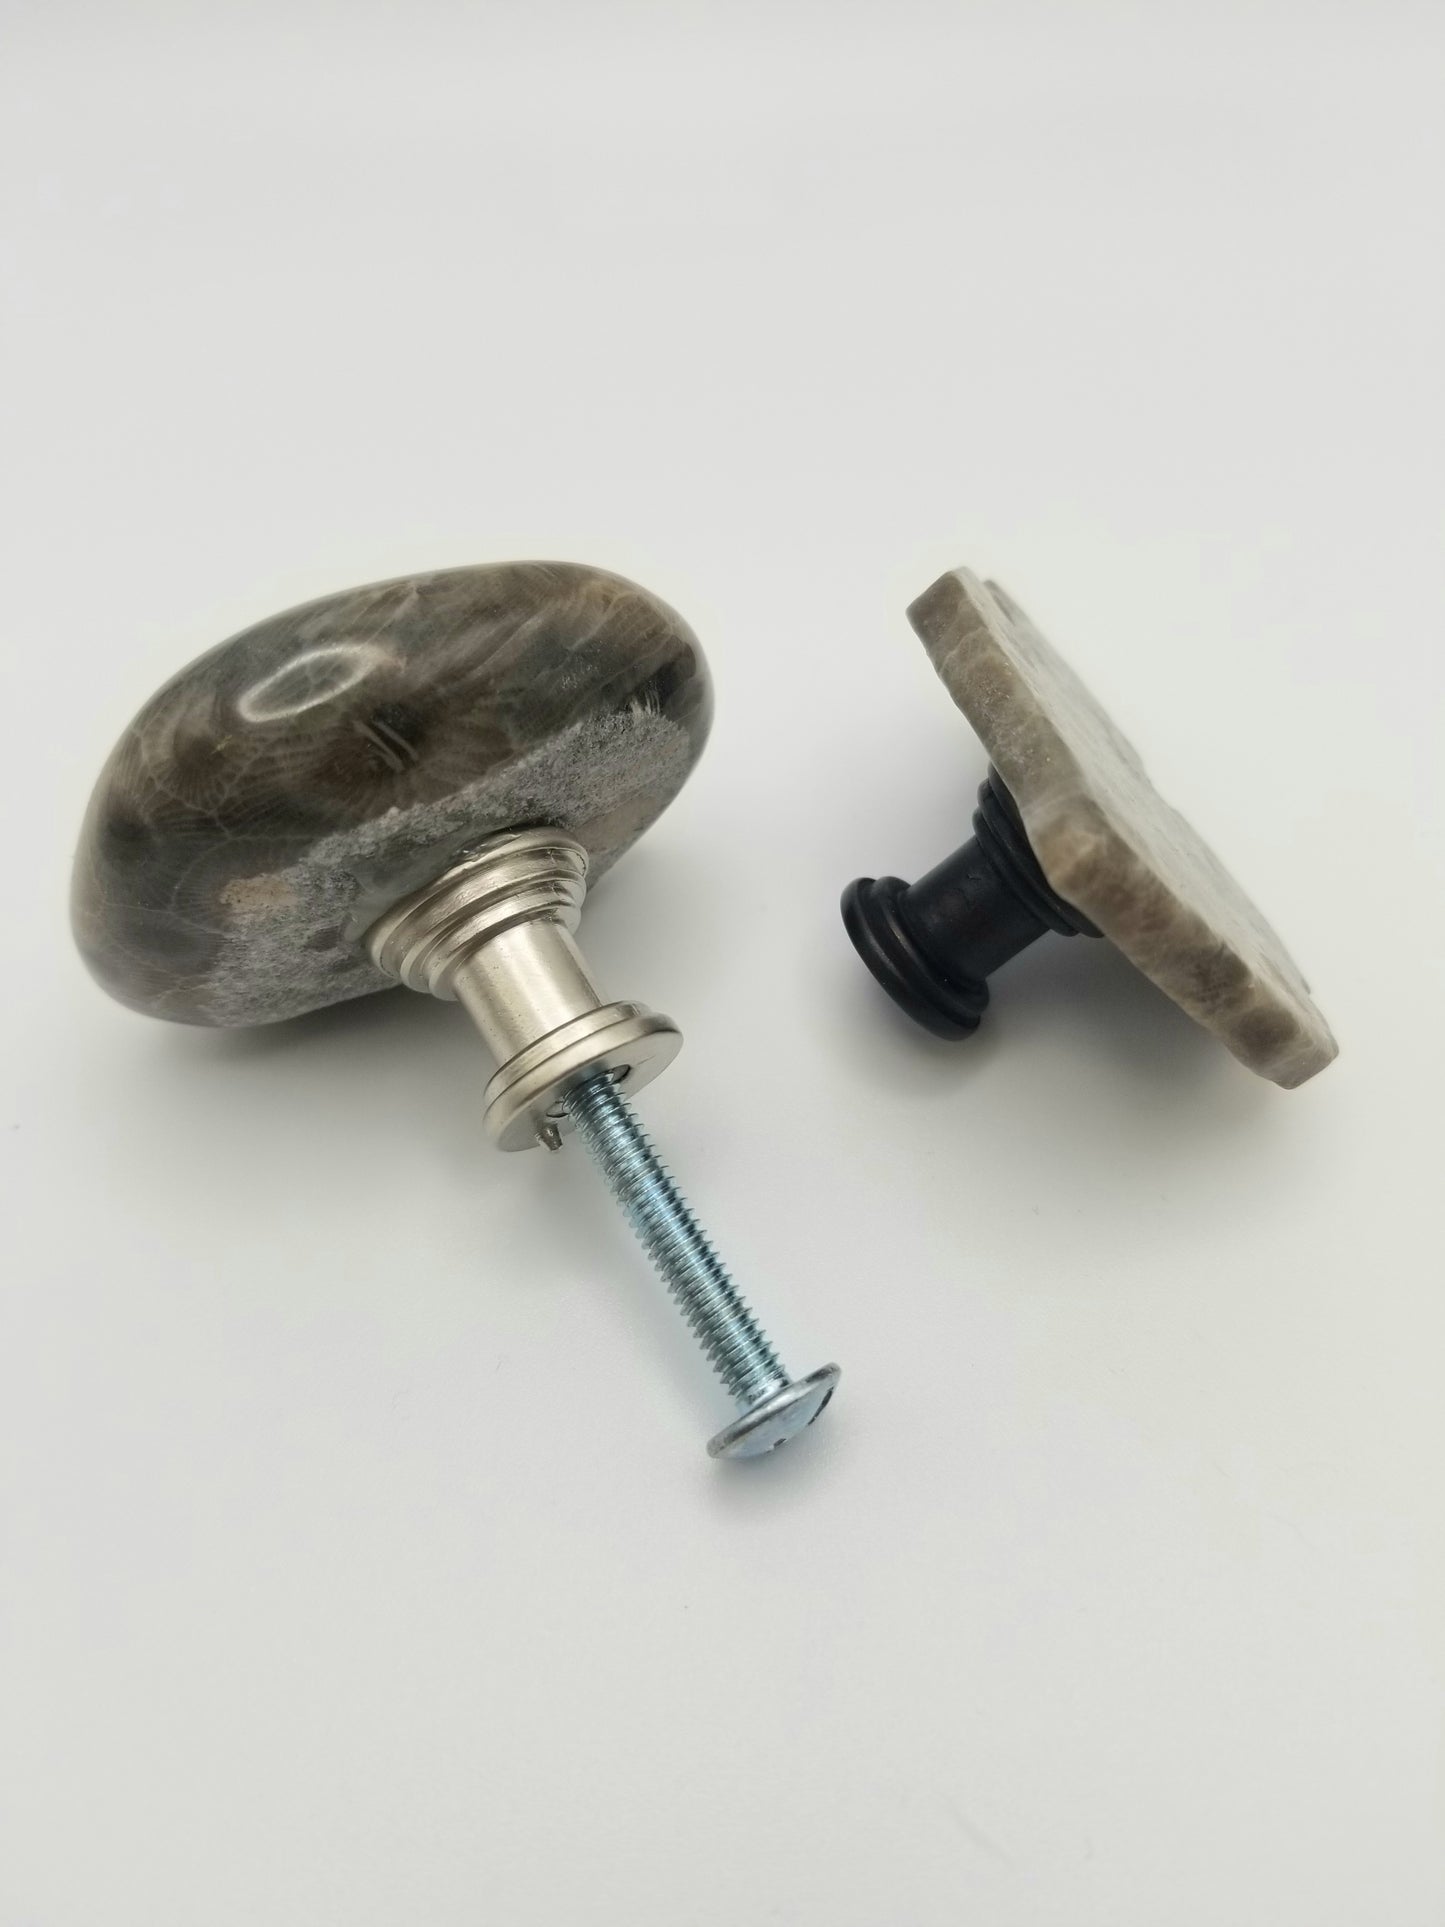 An image of two of the petoskey stone cabinet knobs. One is facing away and shows the silver backing with a screw in it. The other is a side view of the michigan mitt knob with a bronzed backing.